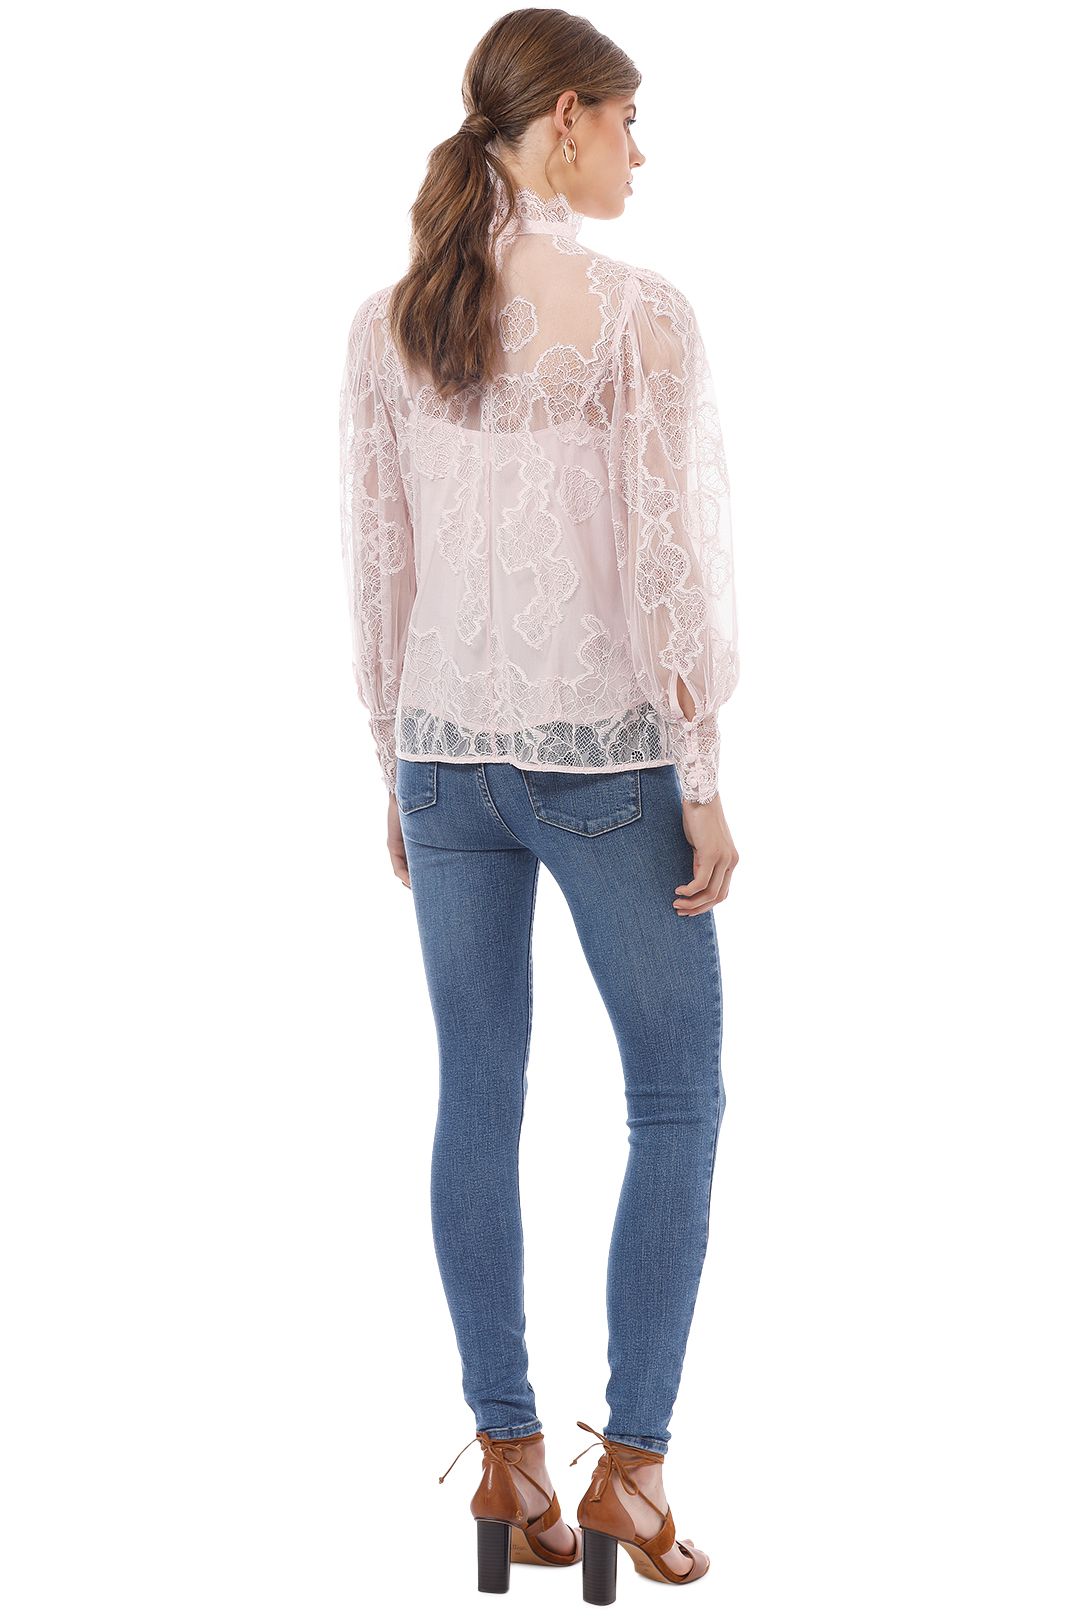 Witchery - Lace Balloon Sleeve Blouse - Pink - Back